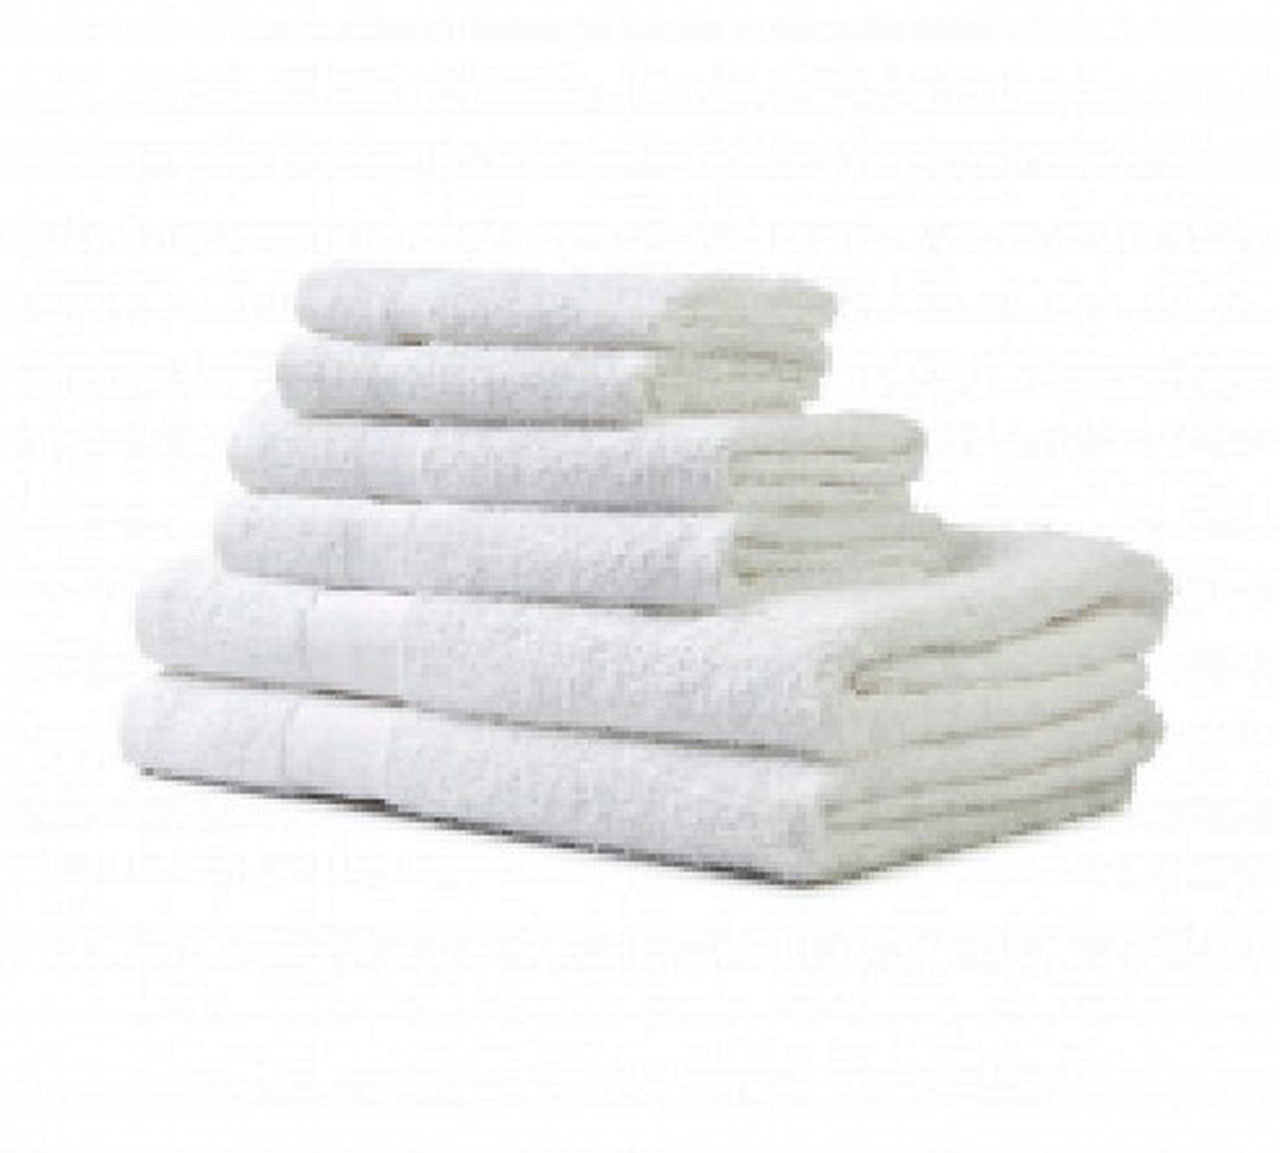 Is the golden jewel blend in these Wholesale Bath Towels soft and comfortable?